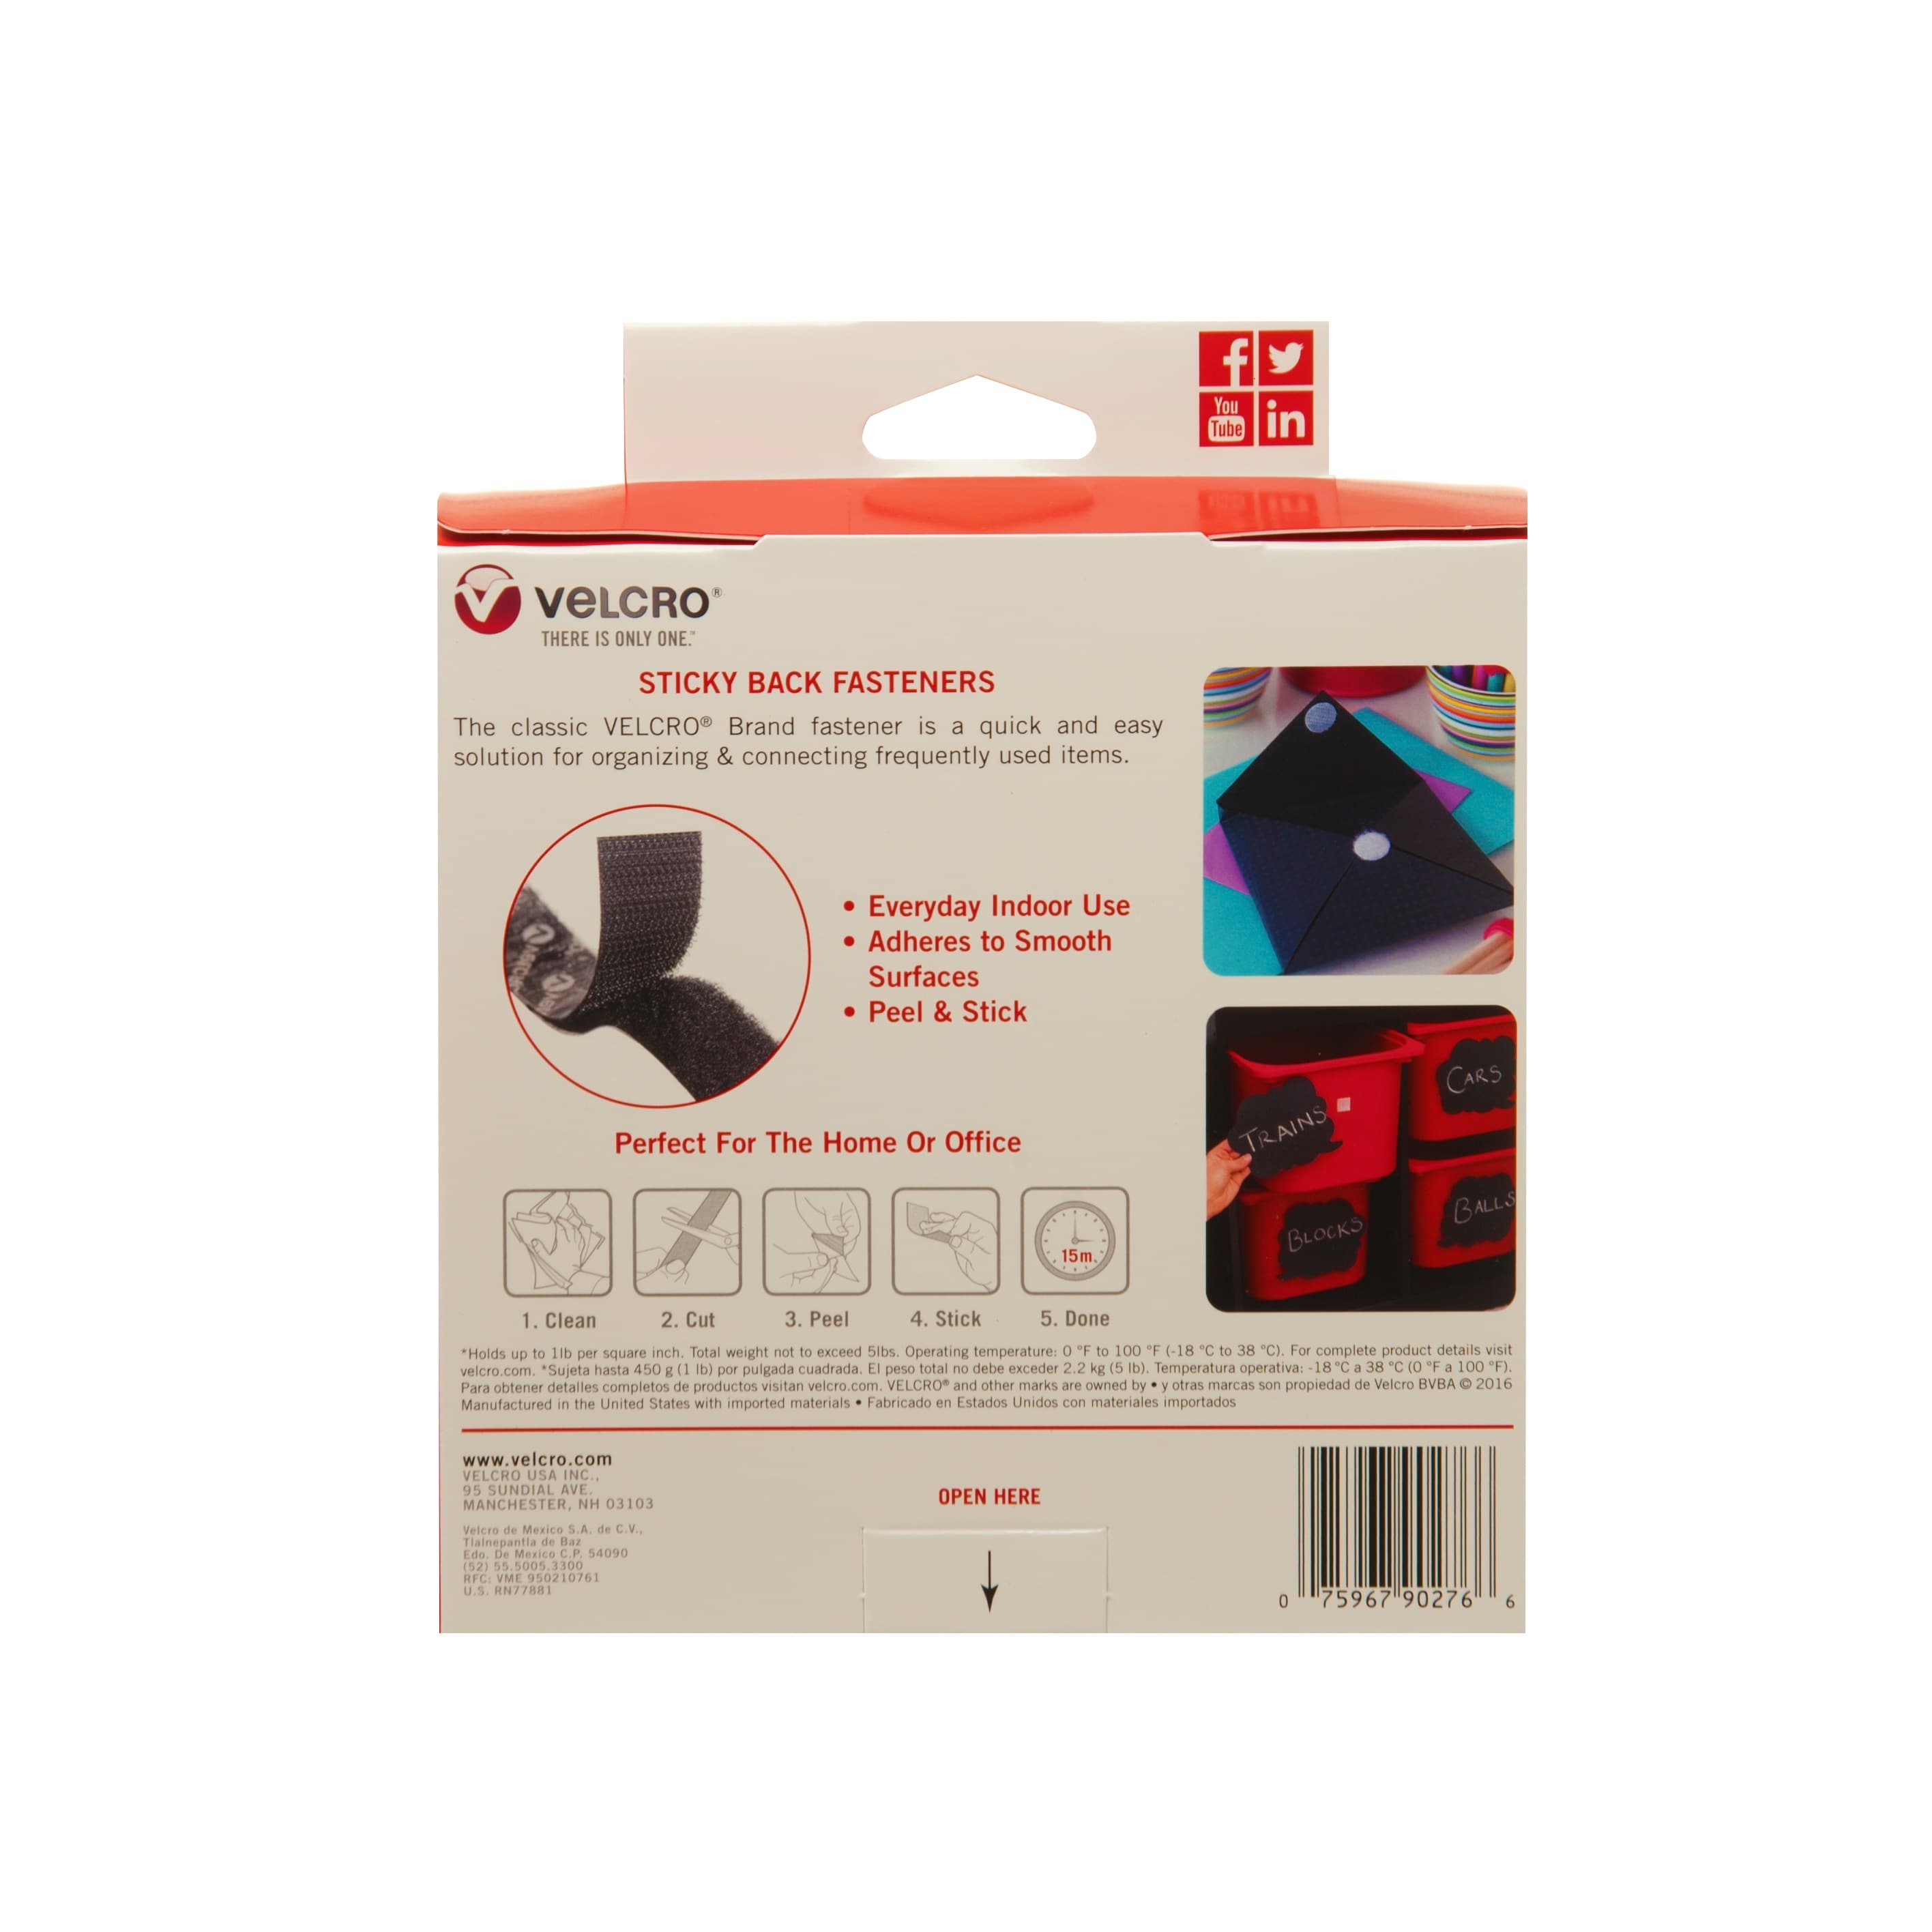 VELCRO Brand 4-Pack Reusable Nylon Not Rated One Size Fits Most